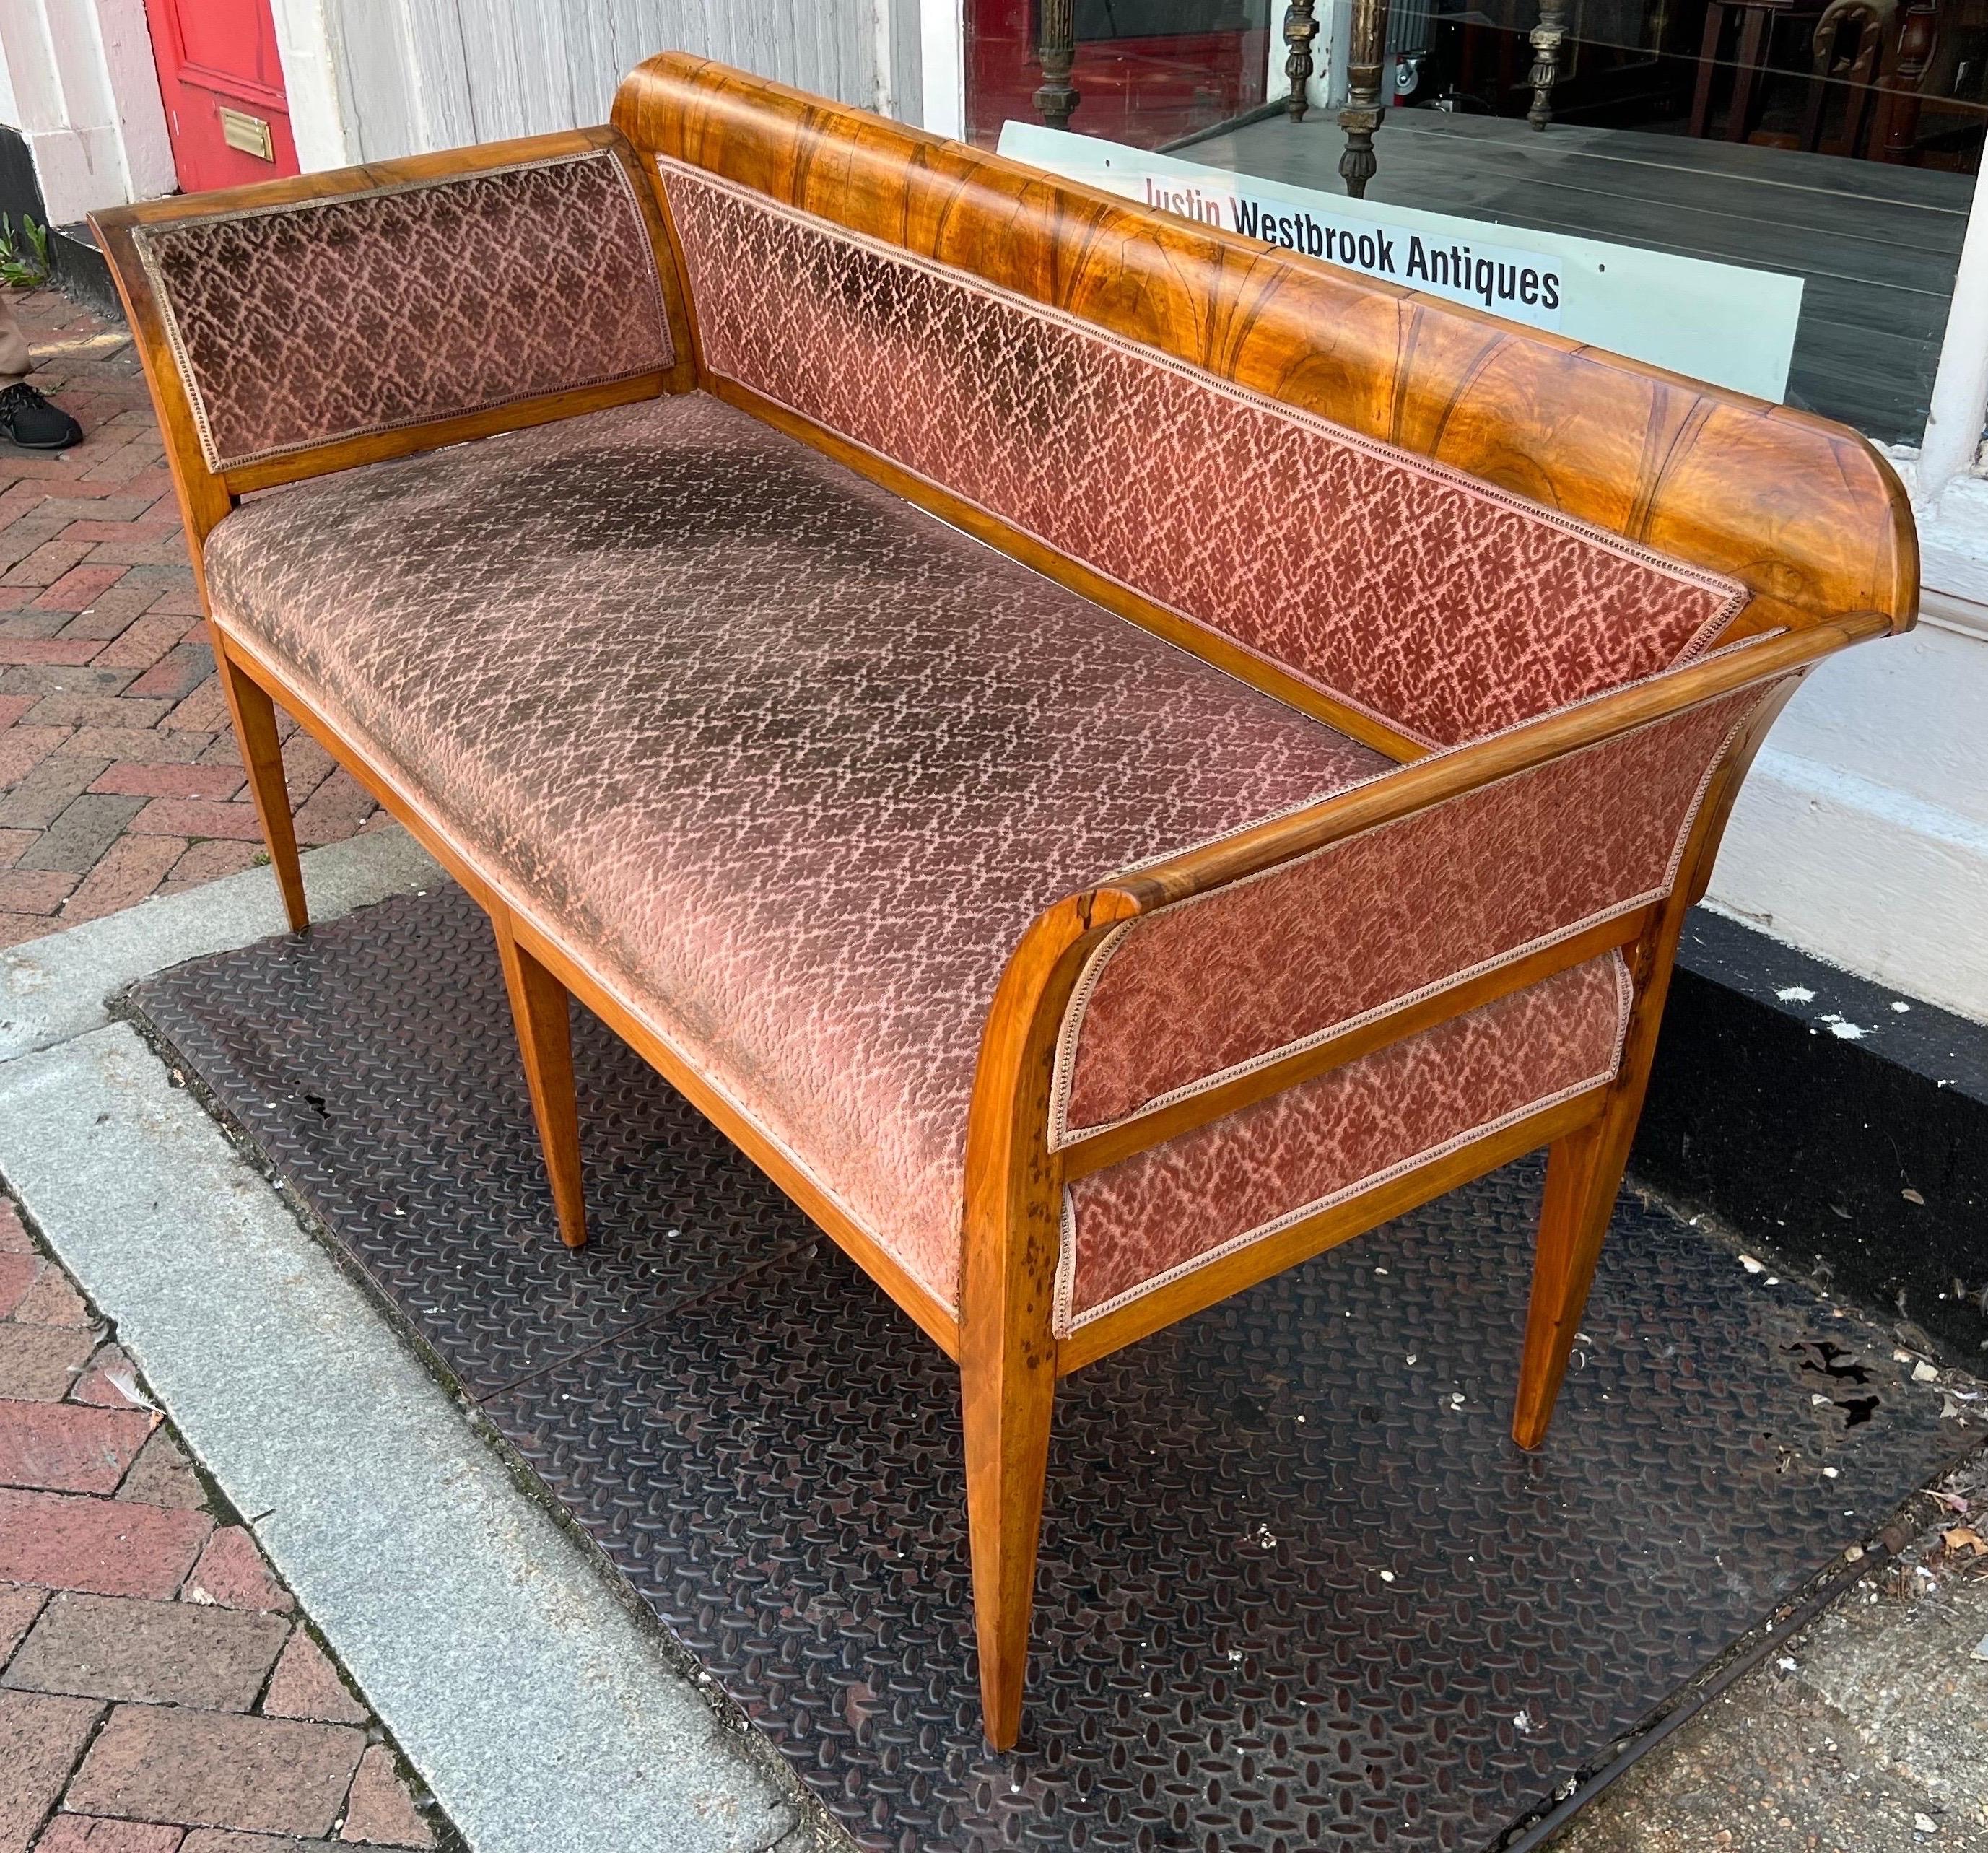 Lovely little 19th century Biedermeier bench or loveseat with neoclassical legs. Made of cherry and/or pear wood with crotch walnut veneers, this bench is simple yet elegant. Fabric needs a good cleaning but no tears or rips.